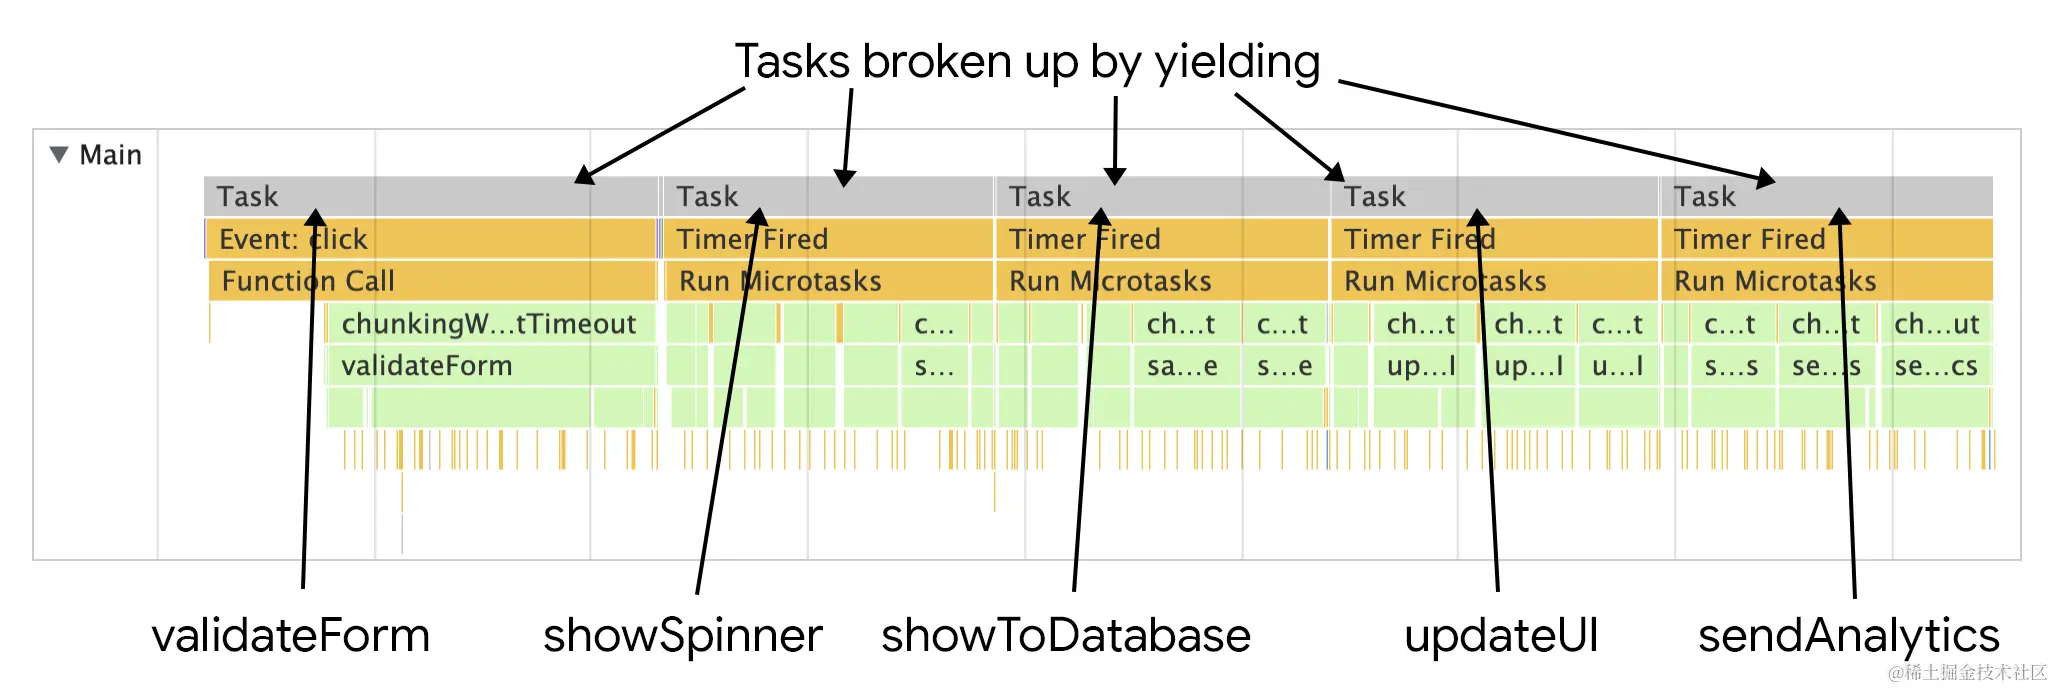 The same saveSettings function depicted in Chrome's performance profiler, only with yielding. The result is the once-monolithic task is now broken up into five separate tasks&ampmdash;one for each function.